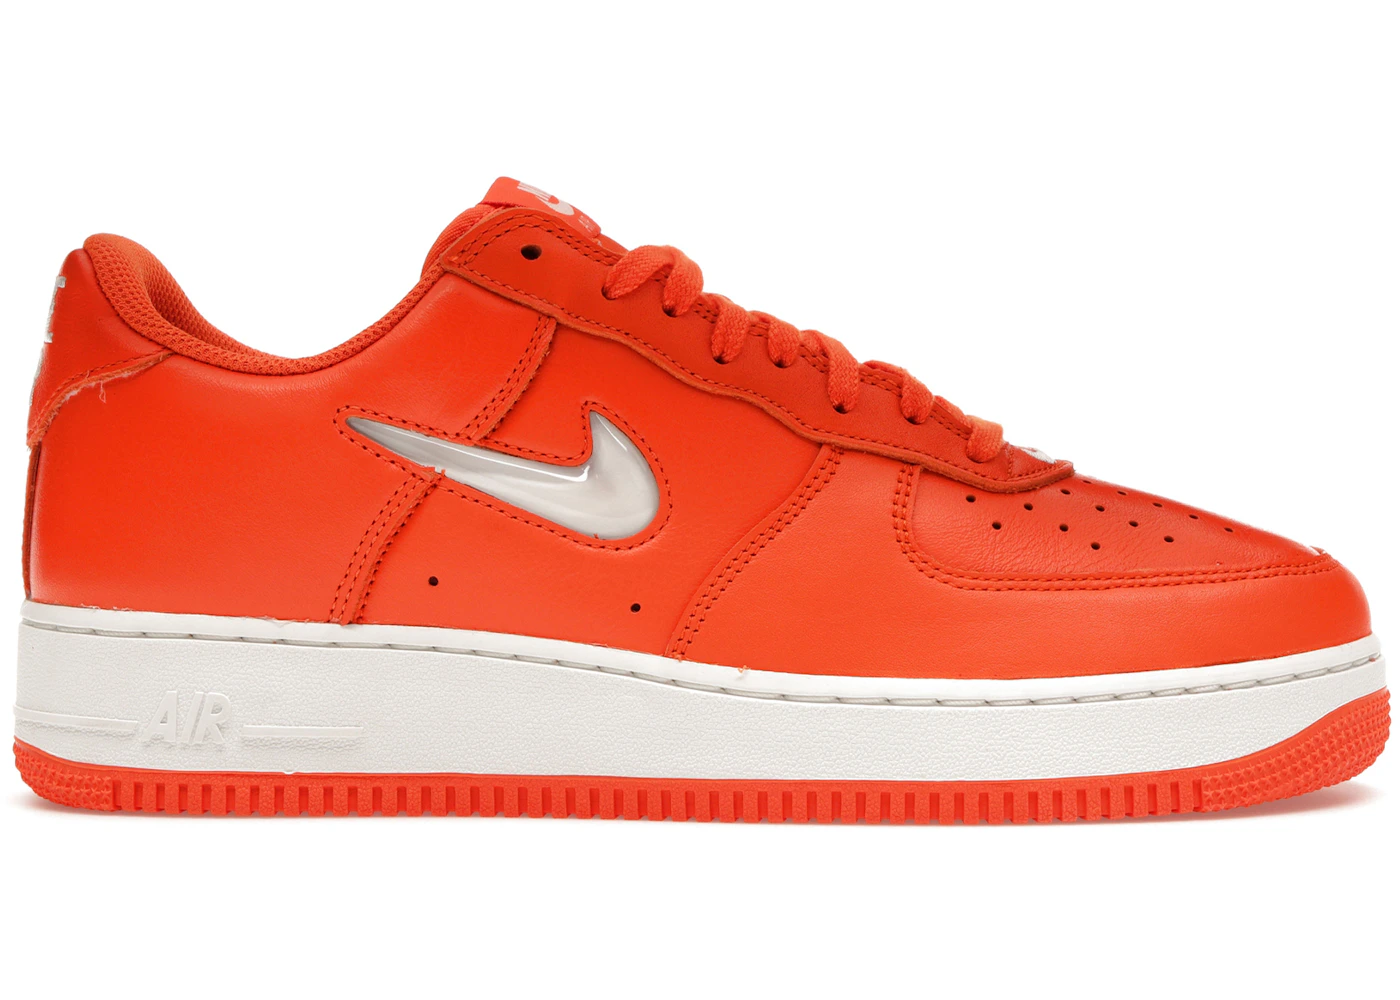 Nike Air Force 1 Low '07 Retro Color of the Month Orange Jewel Men's ...